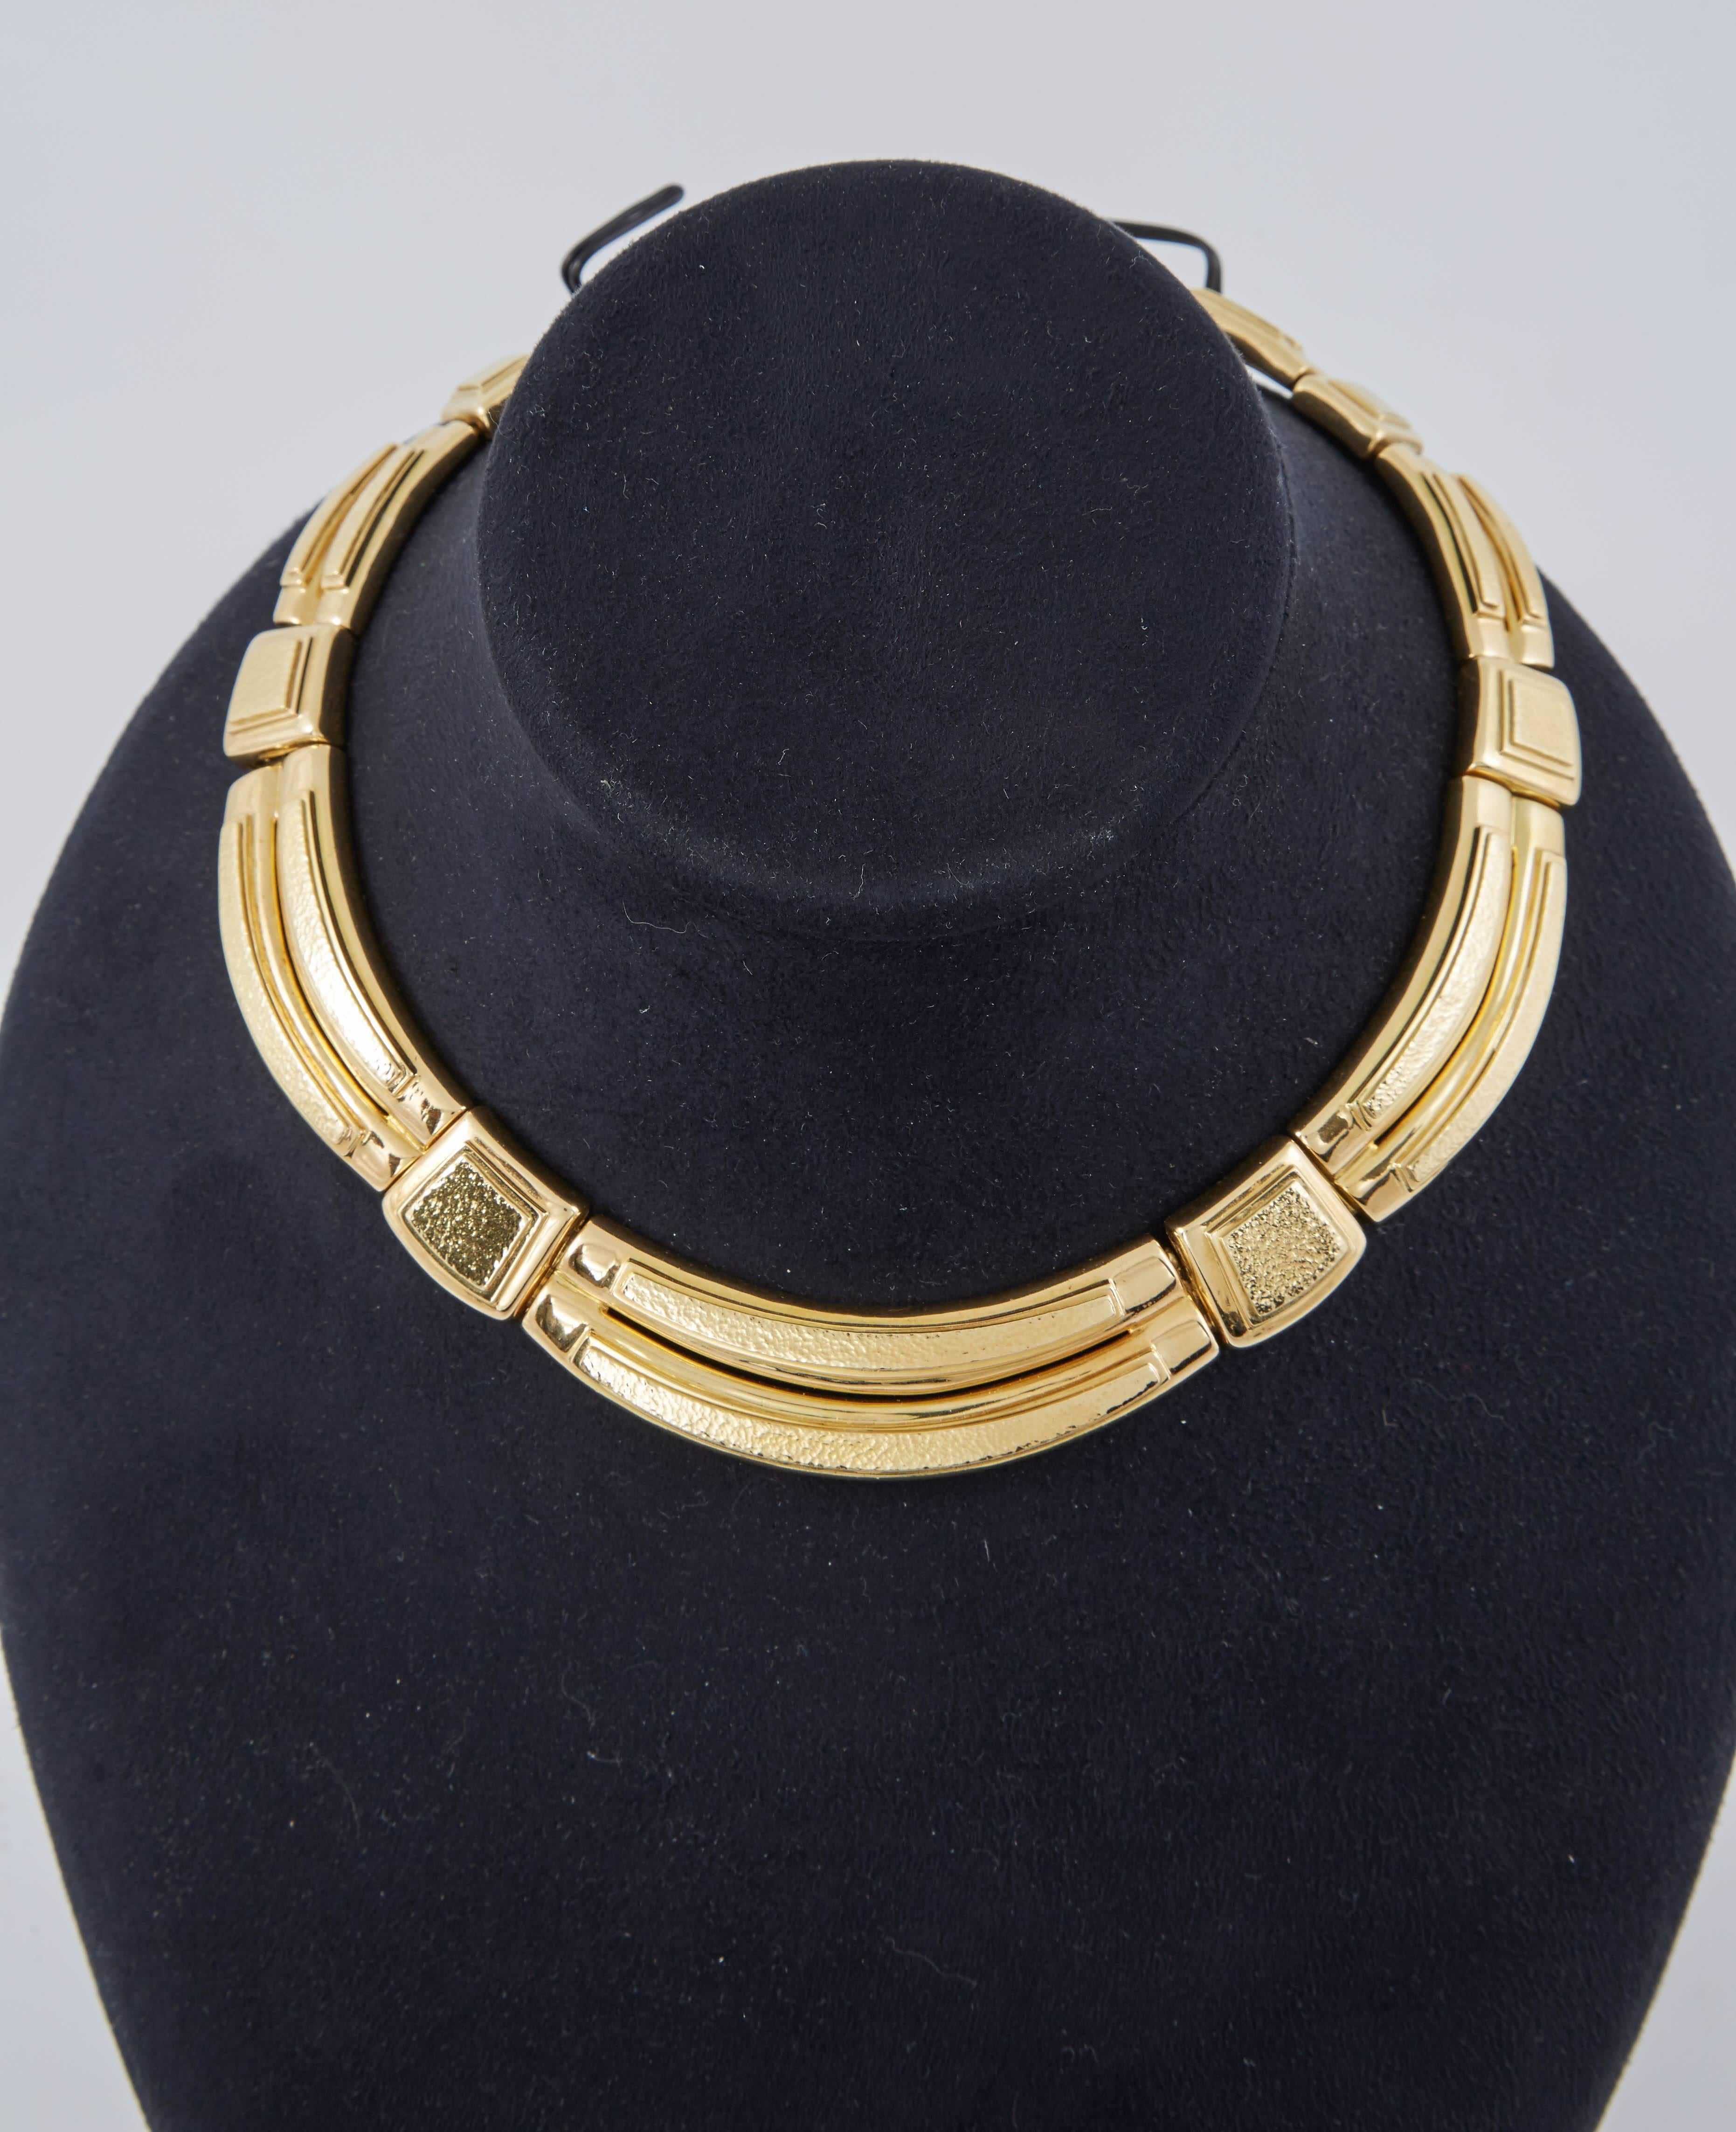 The collar necklace is a striking choker made of large links finely crafted in 18k hammered gold. 